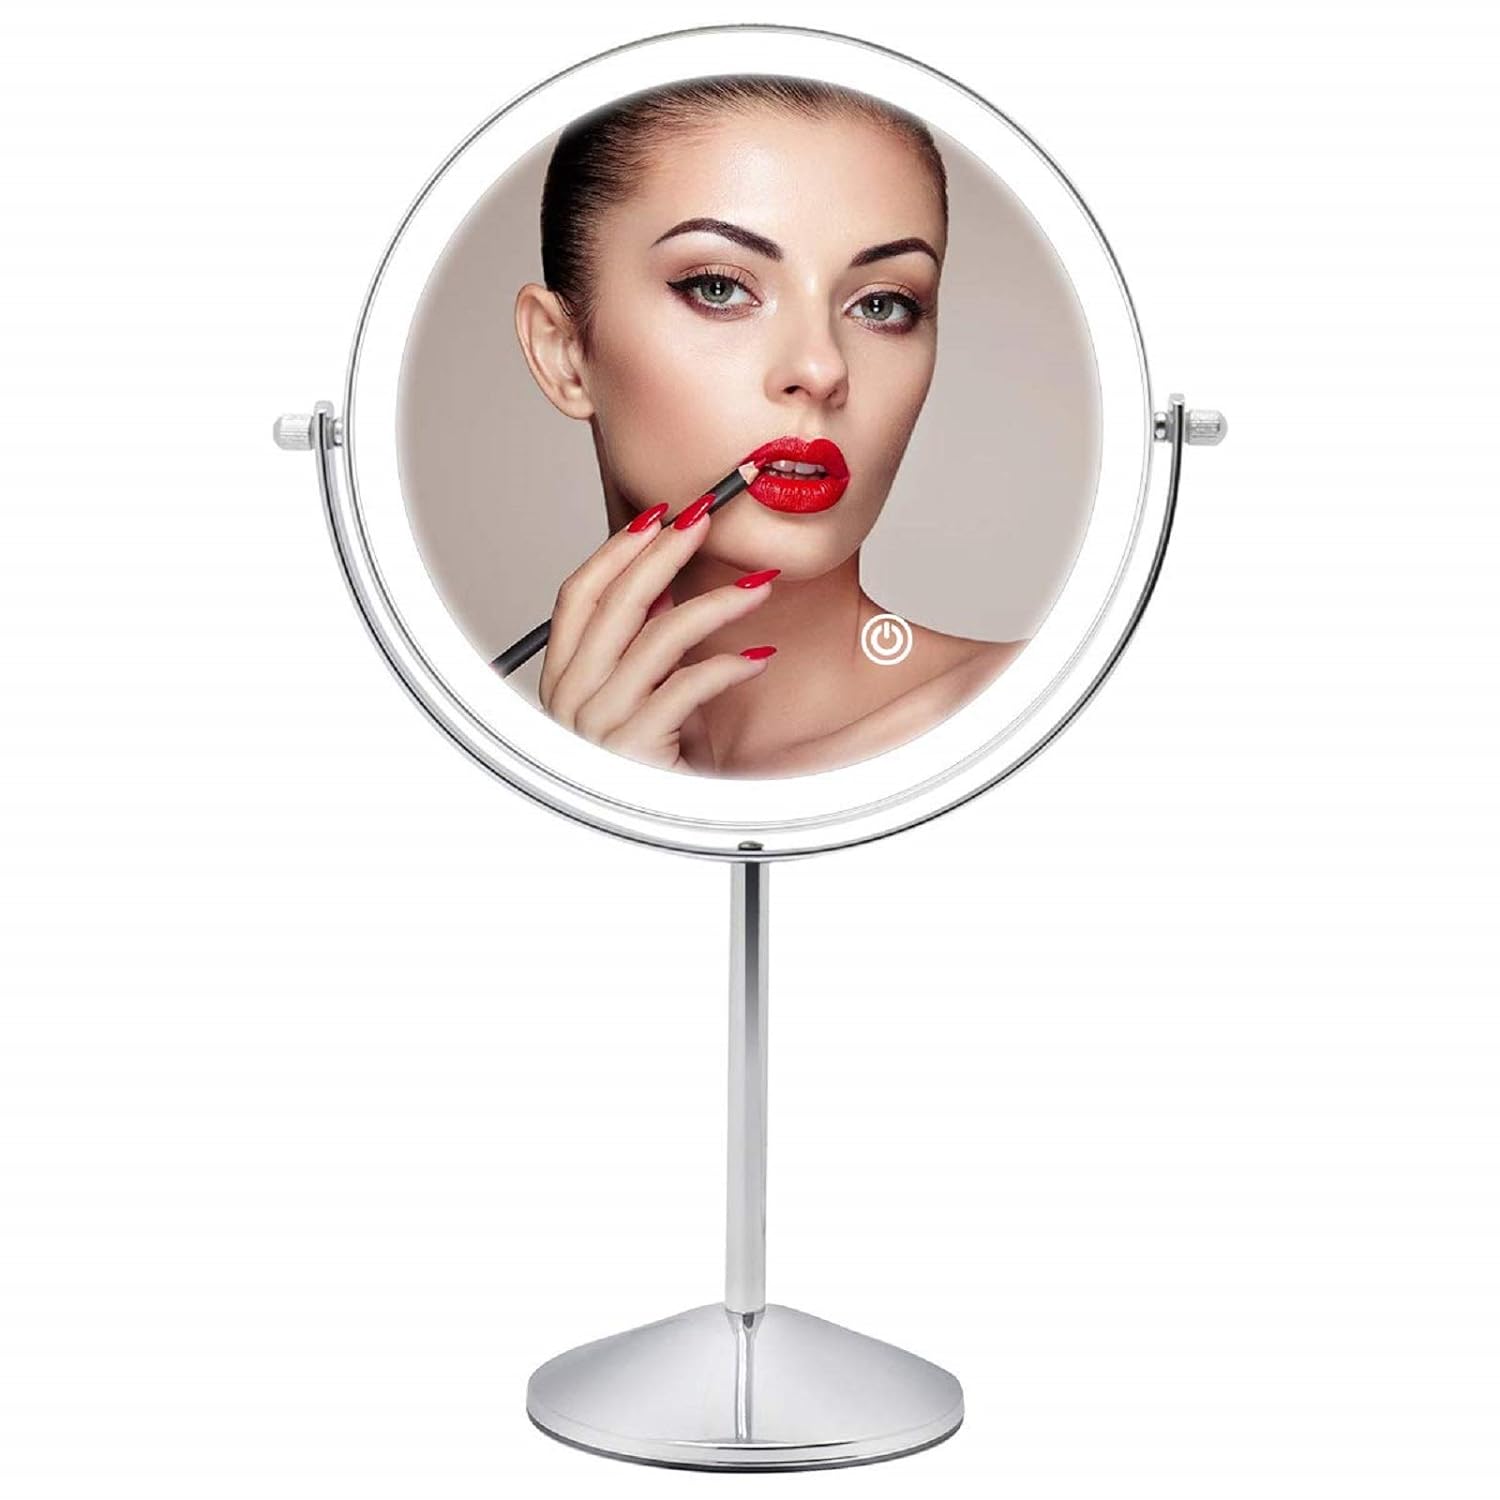 Lighted Makeup Mirror 10x Magnification, 10x Magnification Lighted Makeup Mirror